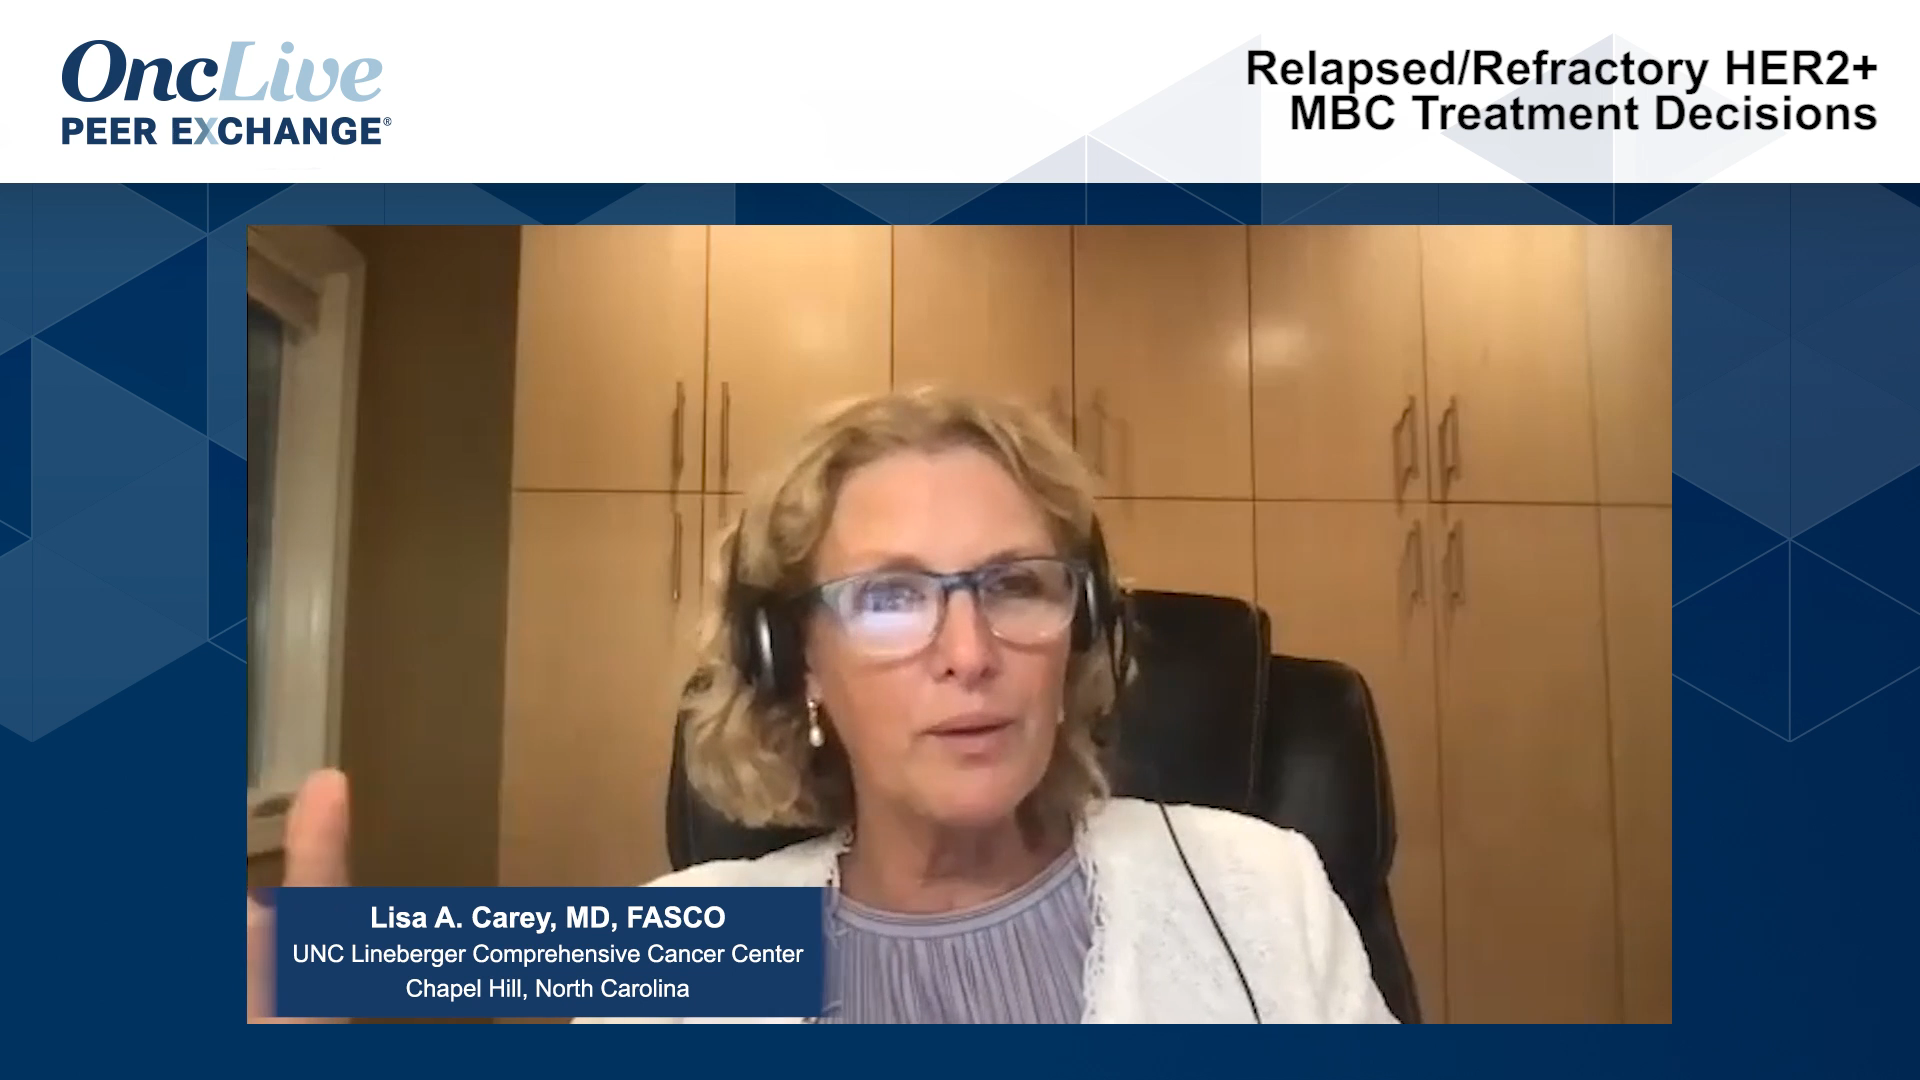 Relapsed/Refractory HER2+ MBC Treatment Decisions